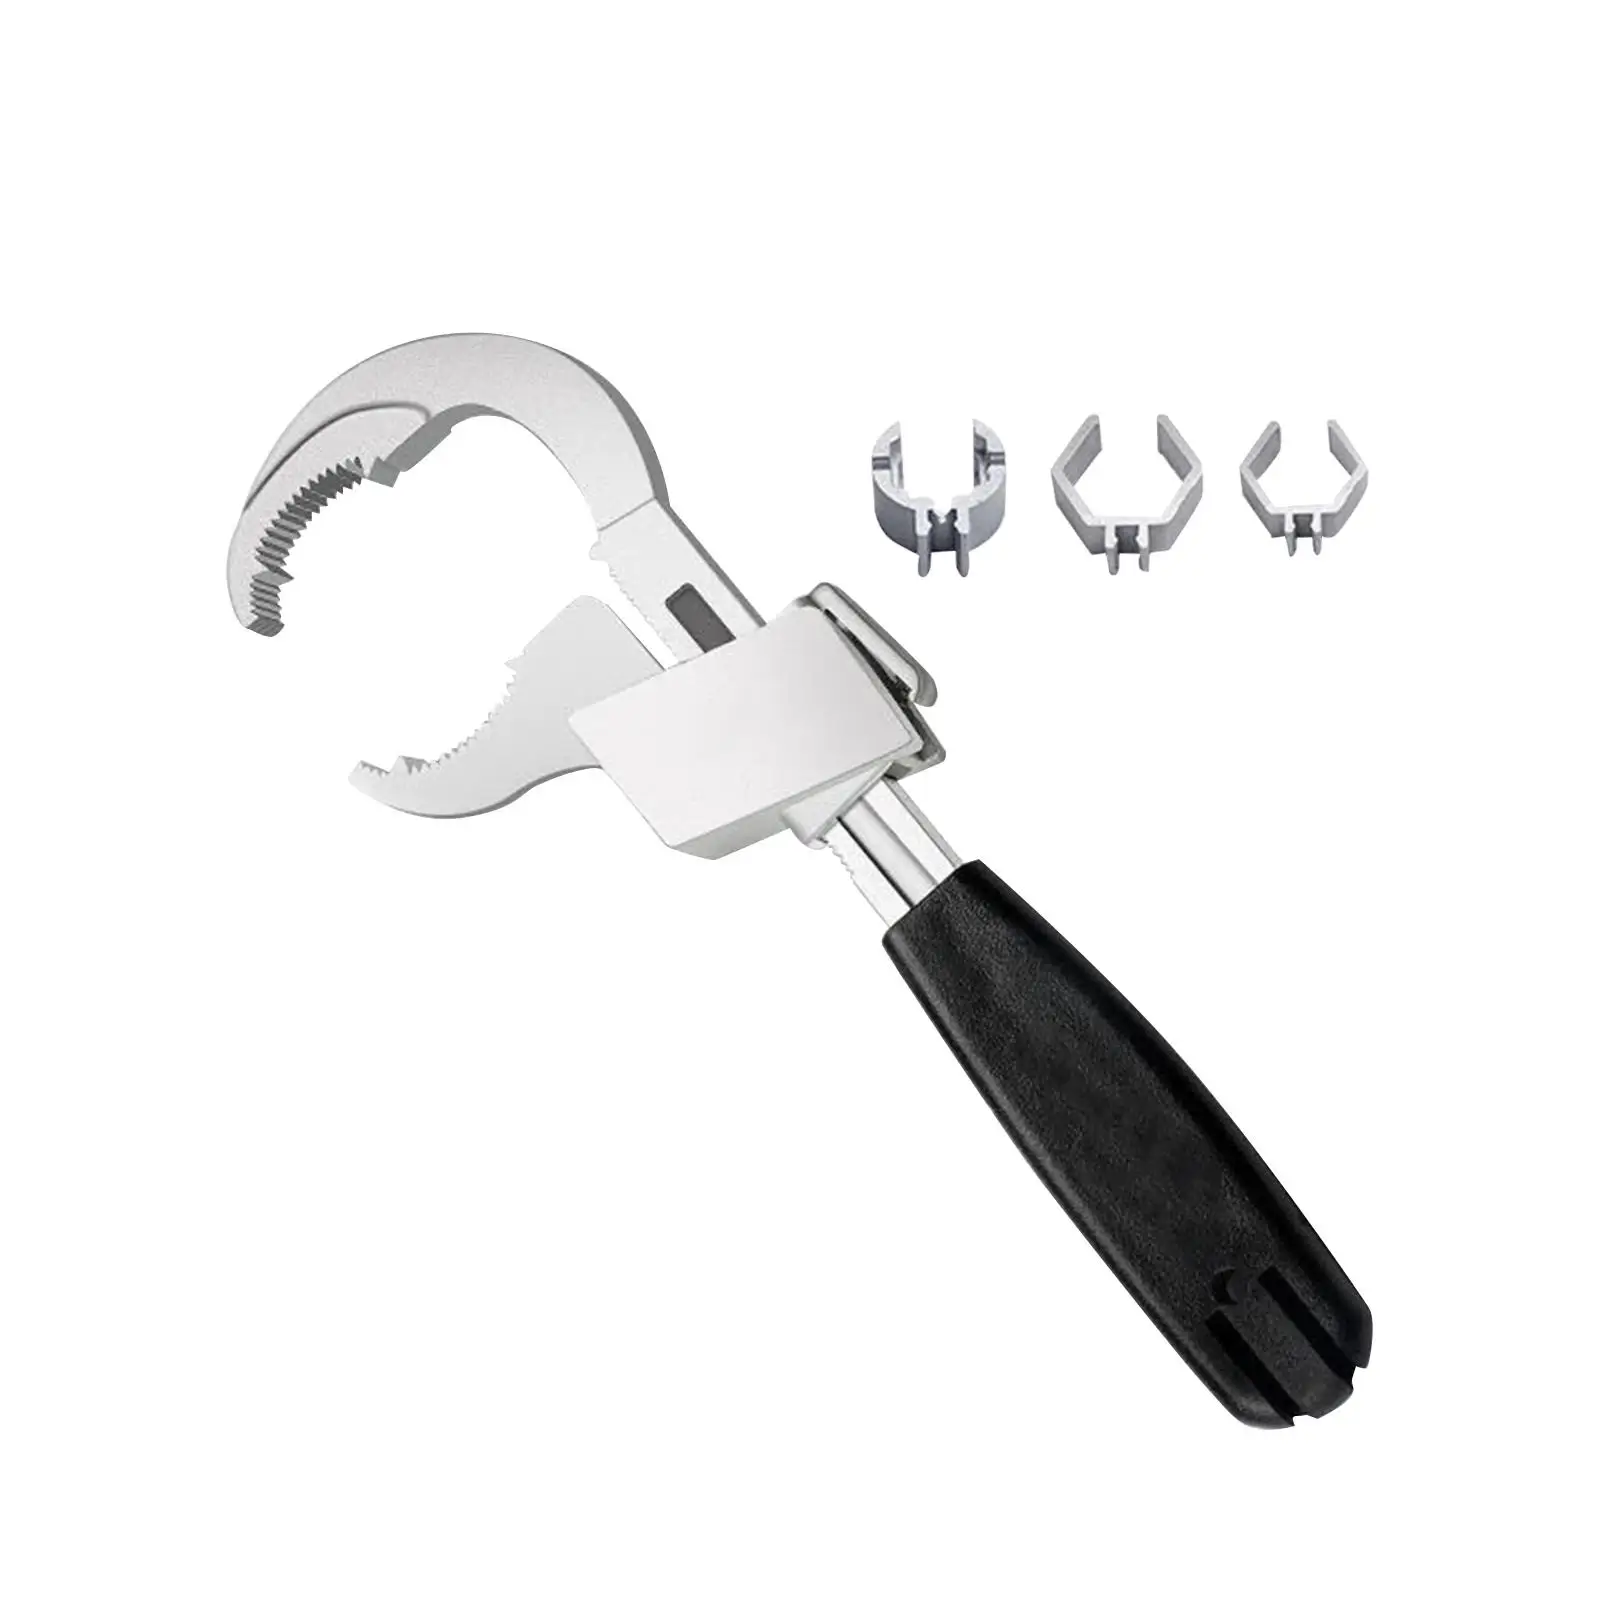 Bathroom Wrench Adjustable Double Ended Wrench Aluminum Alloy Material